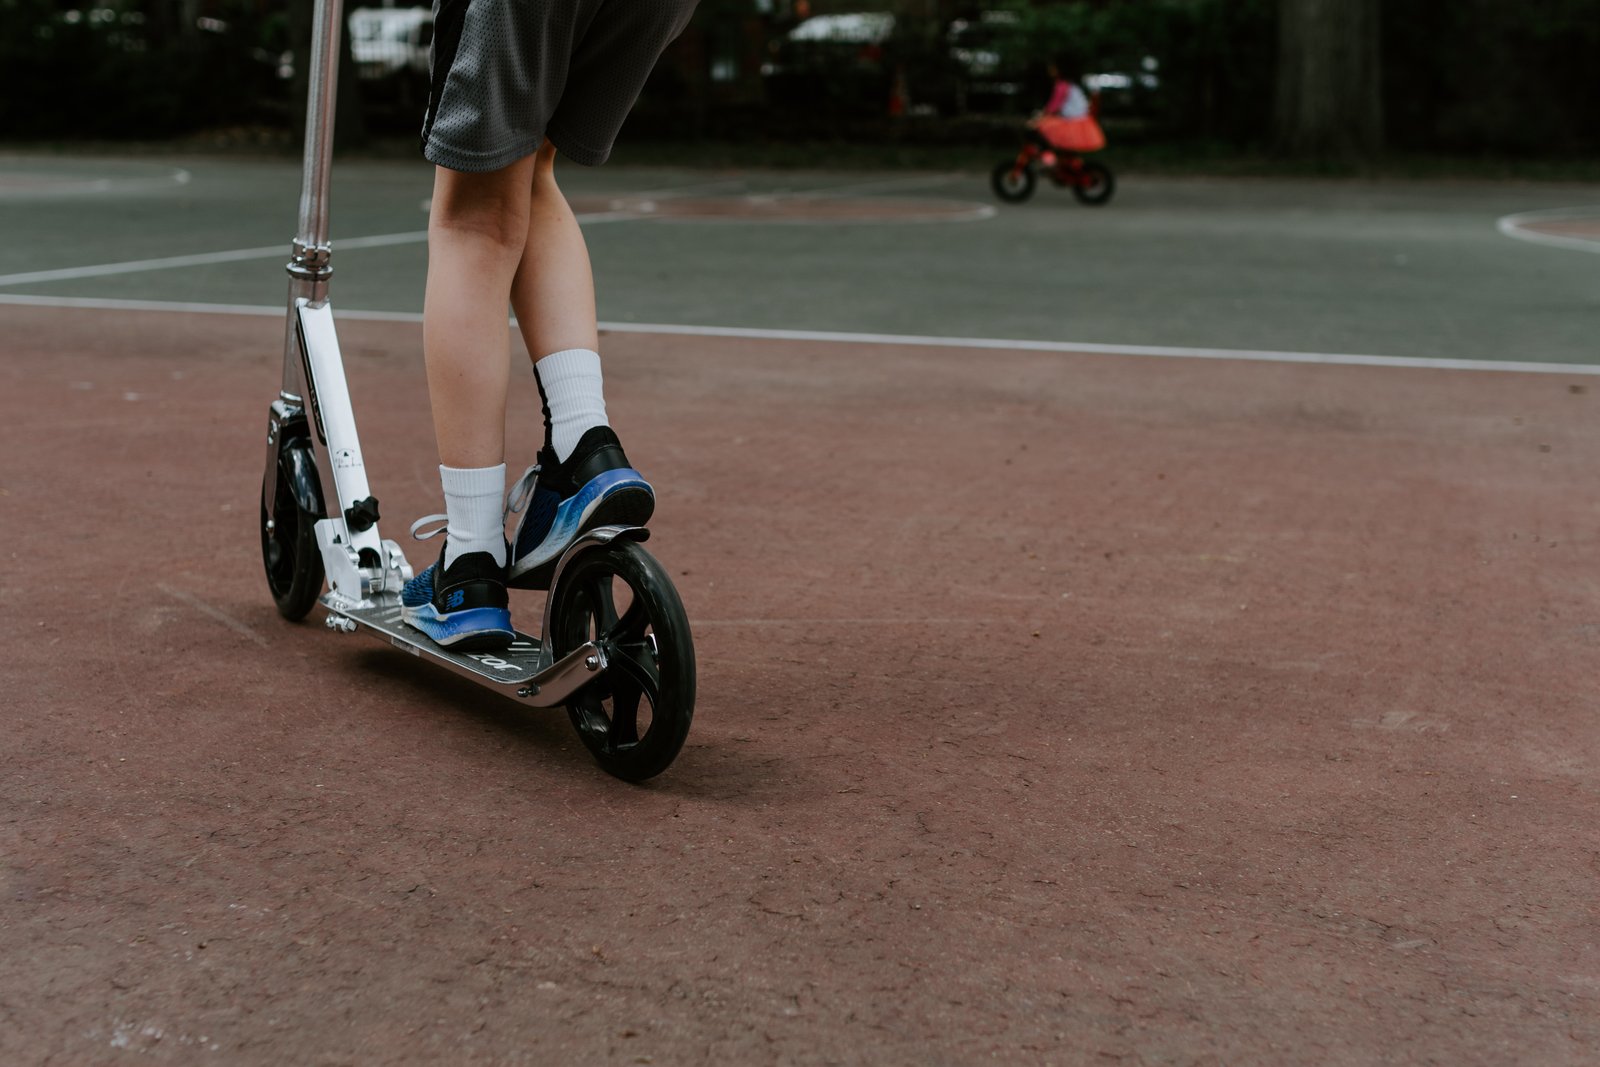 Is Insurance Required For Electric Scooters?